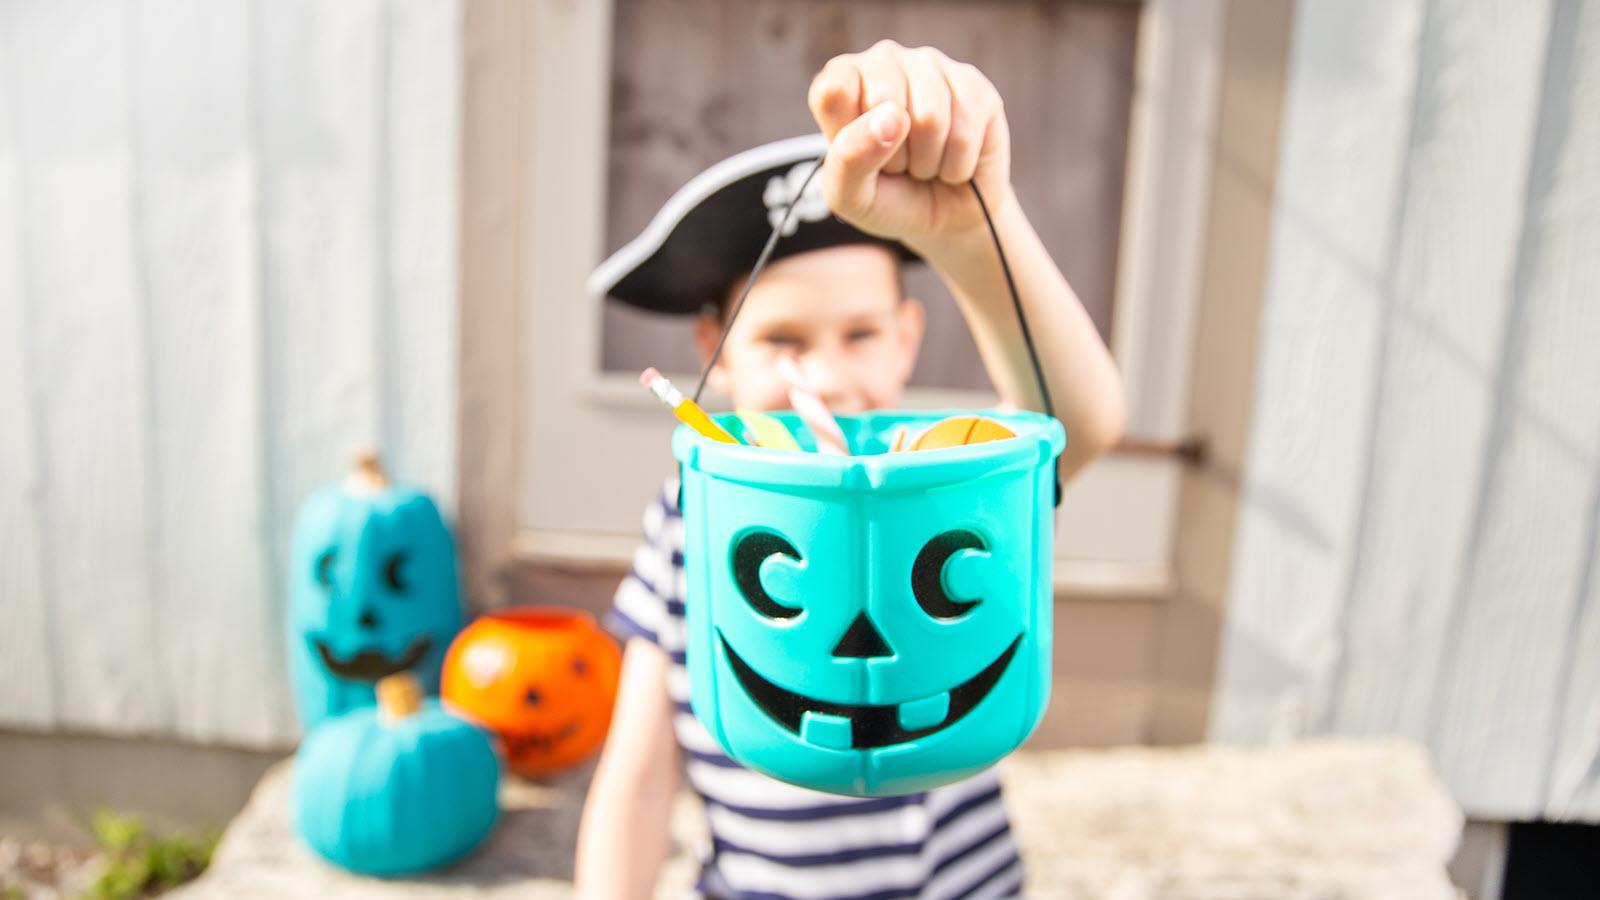 A child dressed as a pirate for Halloween holds a teal pumpkin bucket